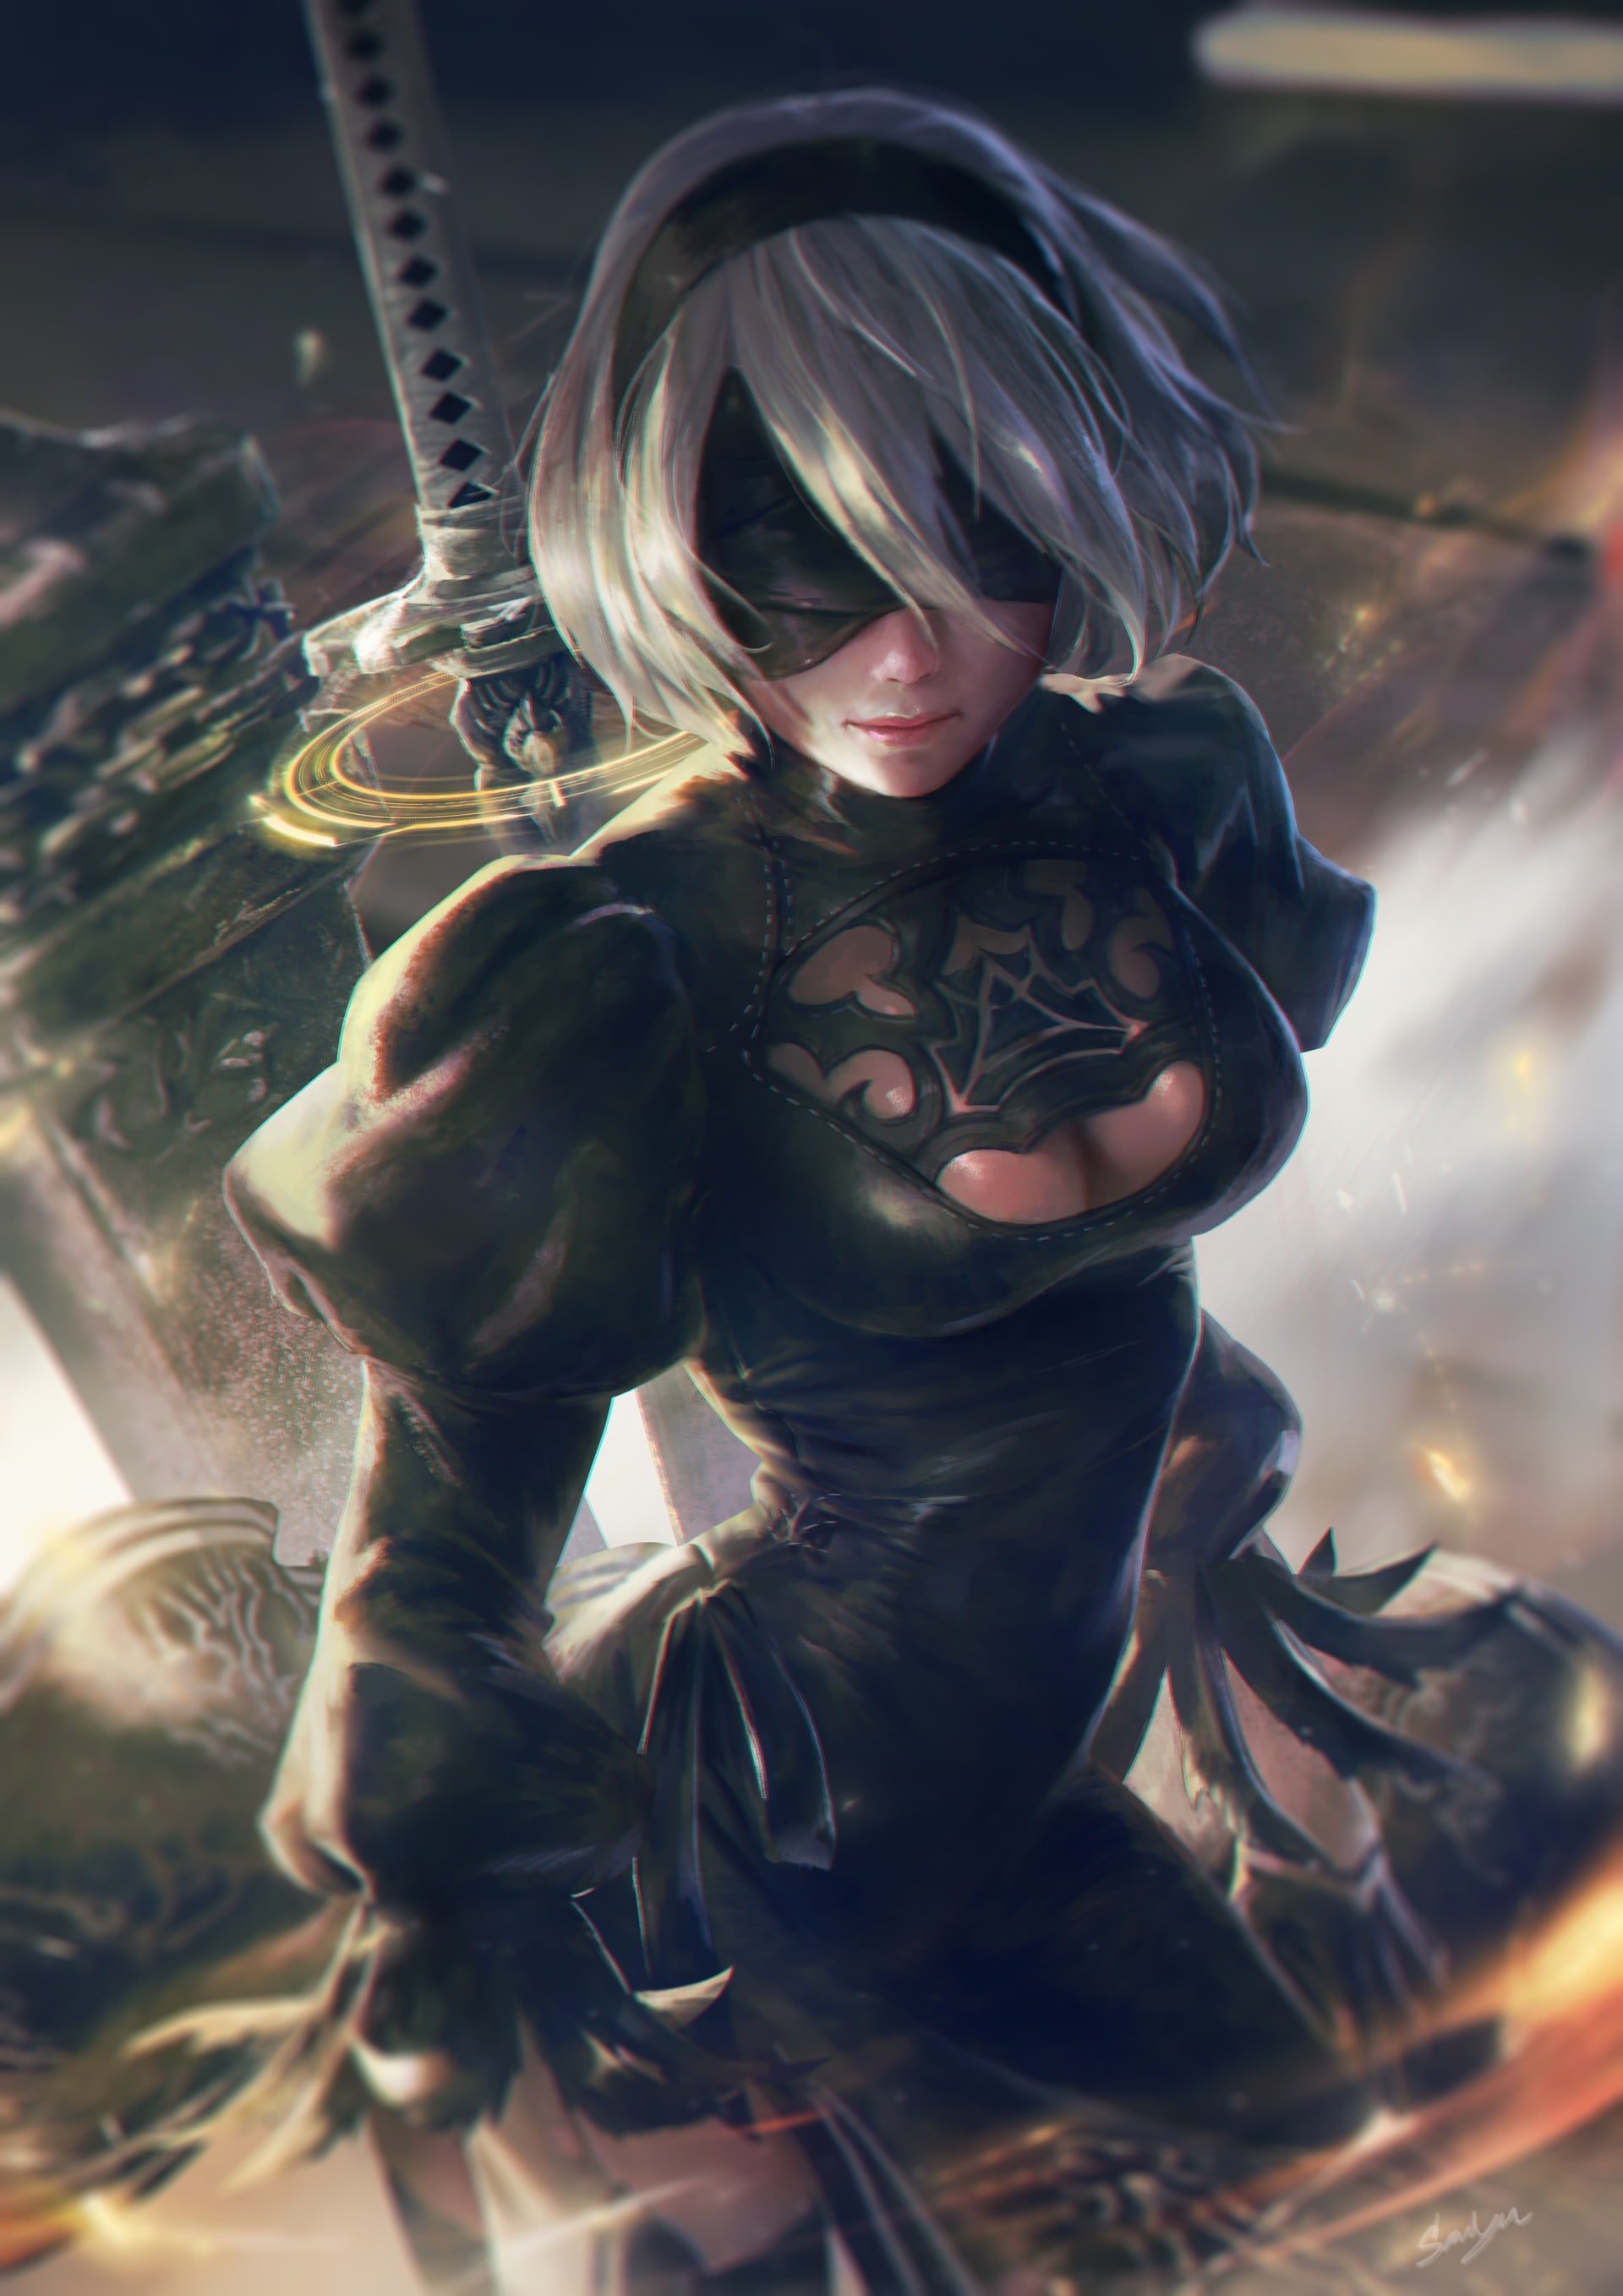 White Haired Female With Black Blindfold And Sword Illustration Hd Images, Photos, Reviews